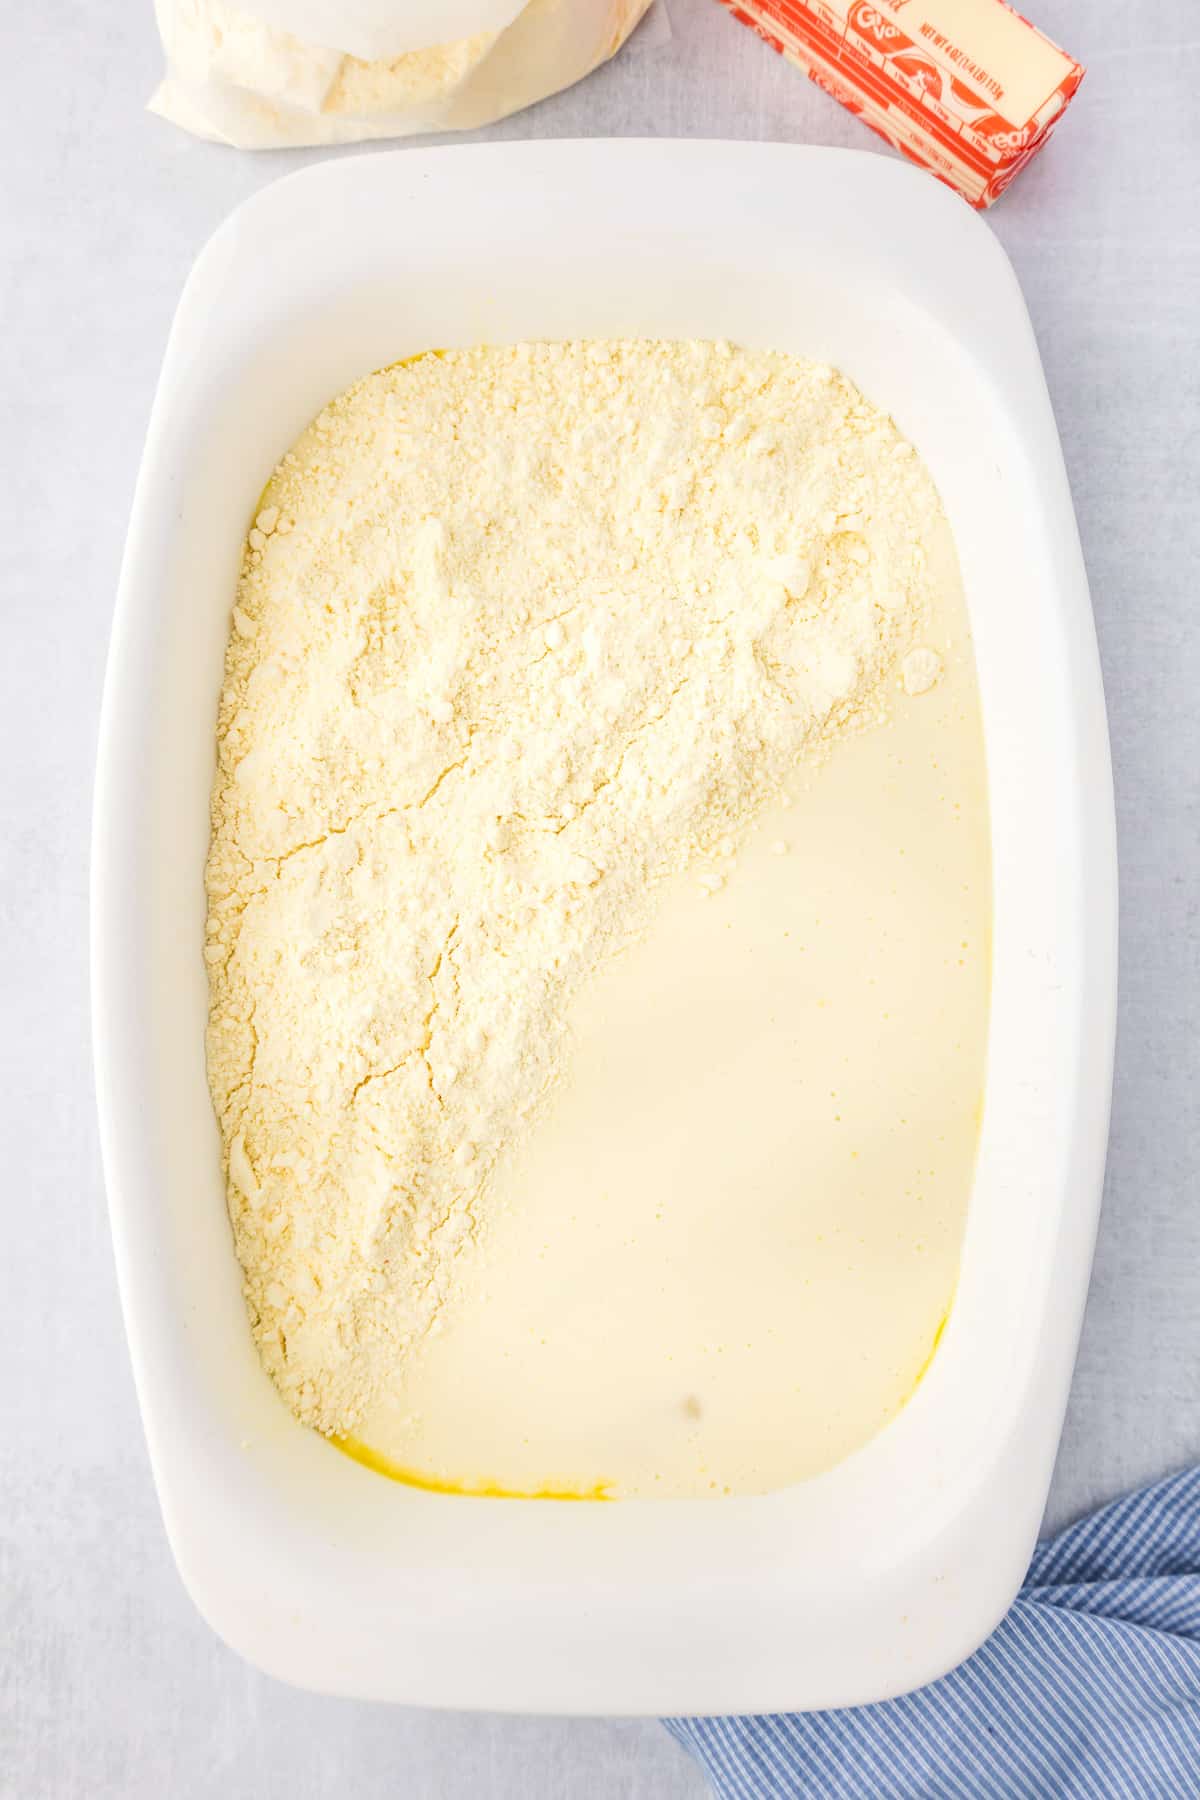 A white pan filled with lemon and cream cheese layers being topped with dry yellow cake mix.